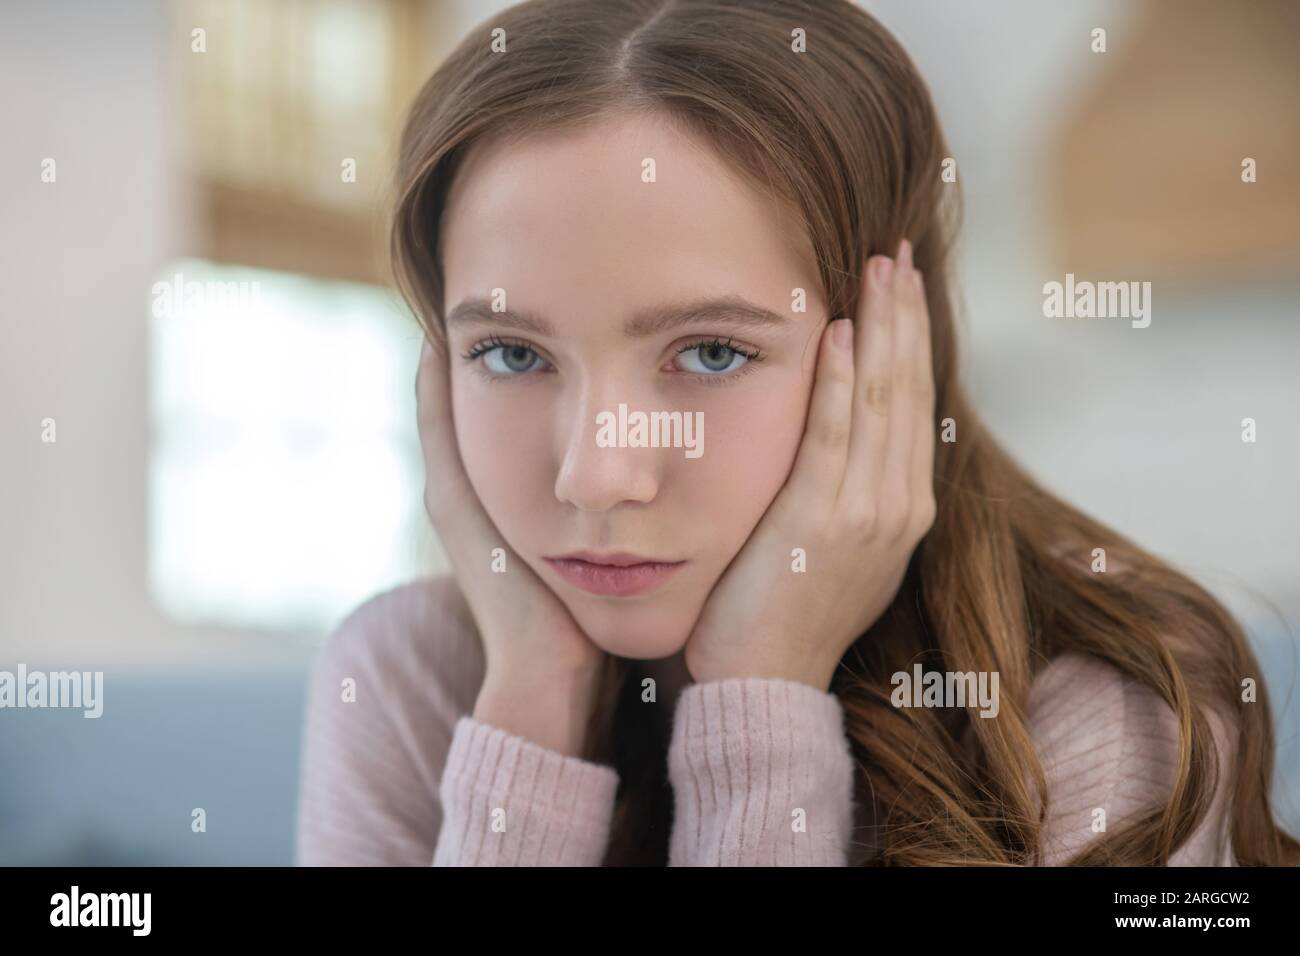 Teen girl face looking sadly in front of herself. Stock Photo